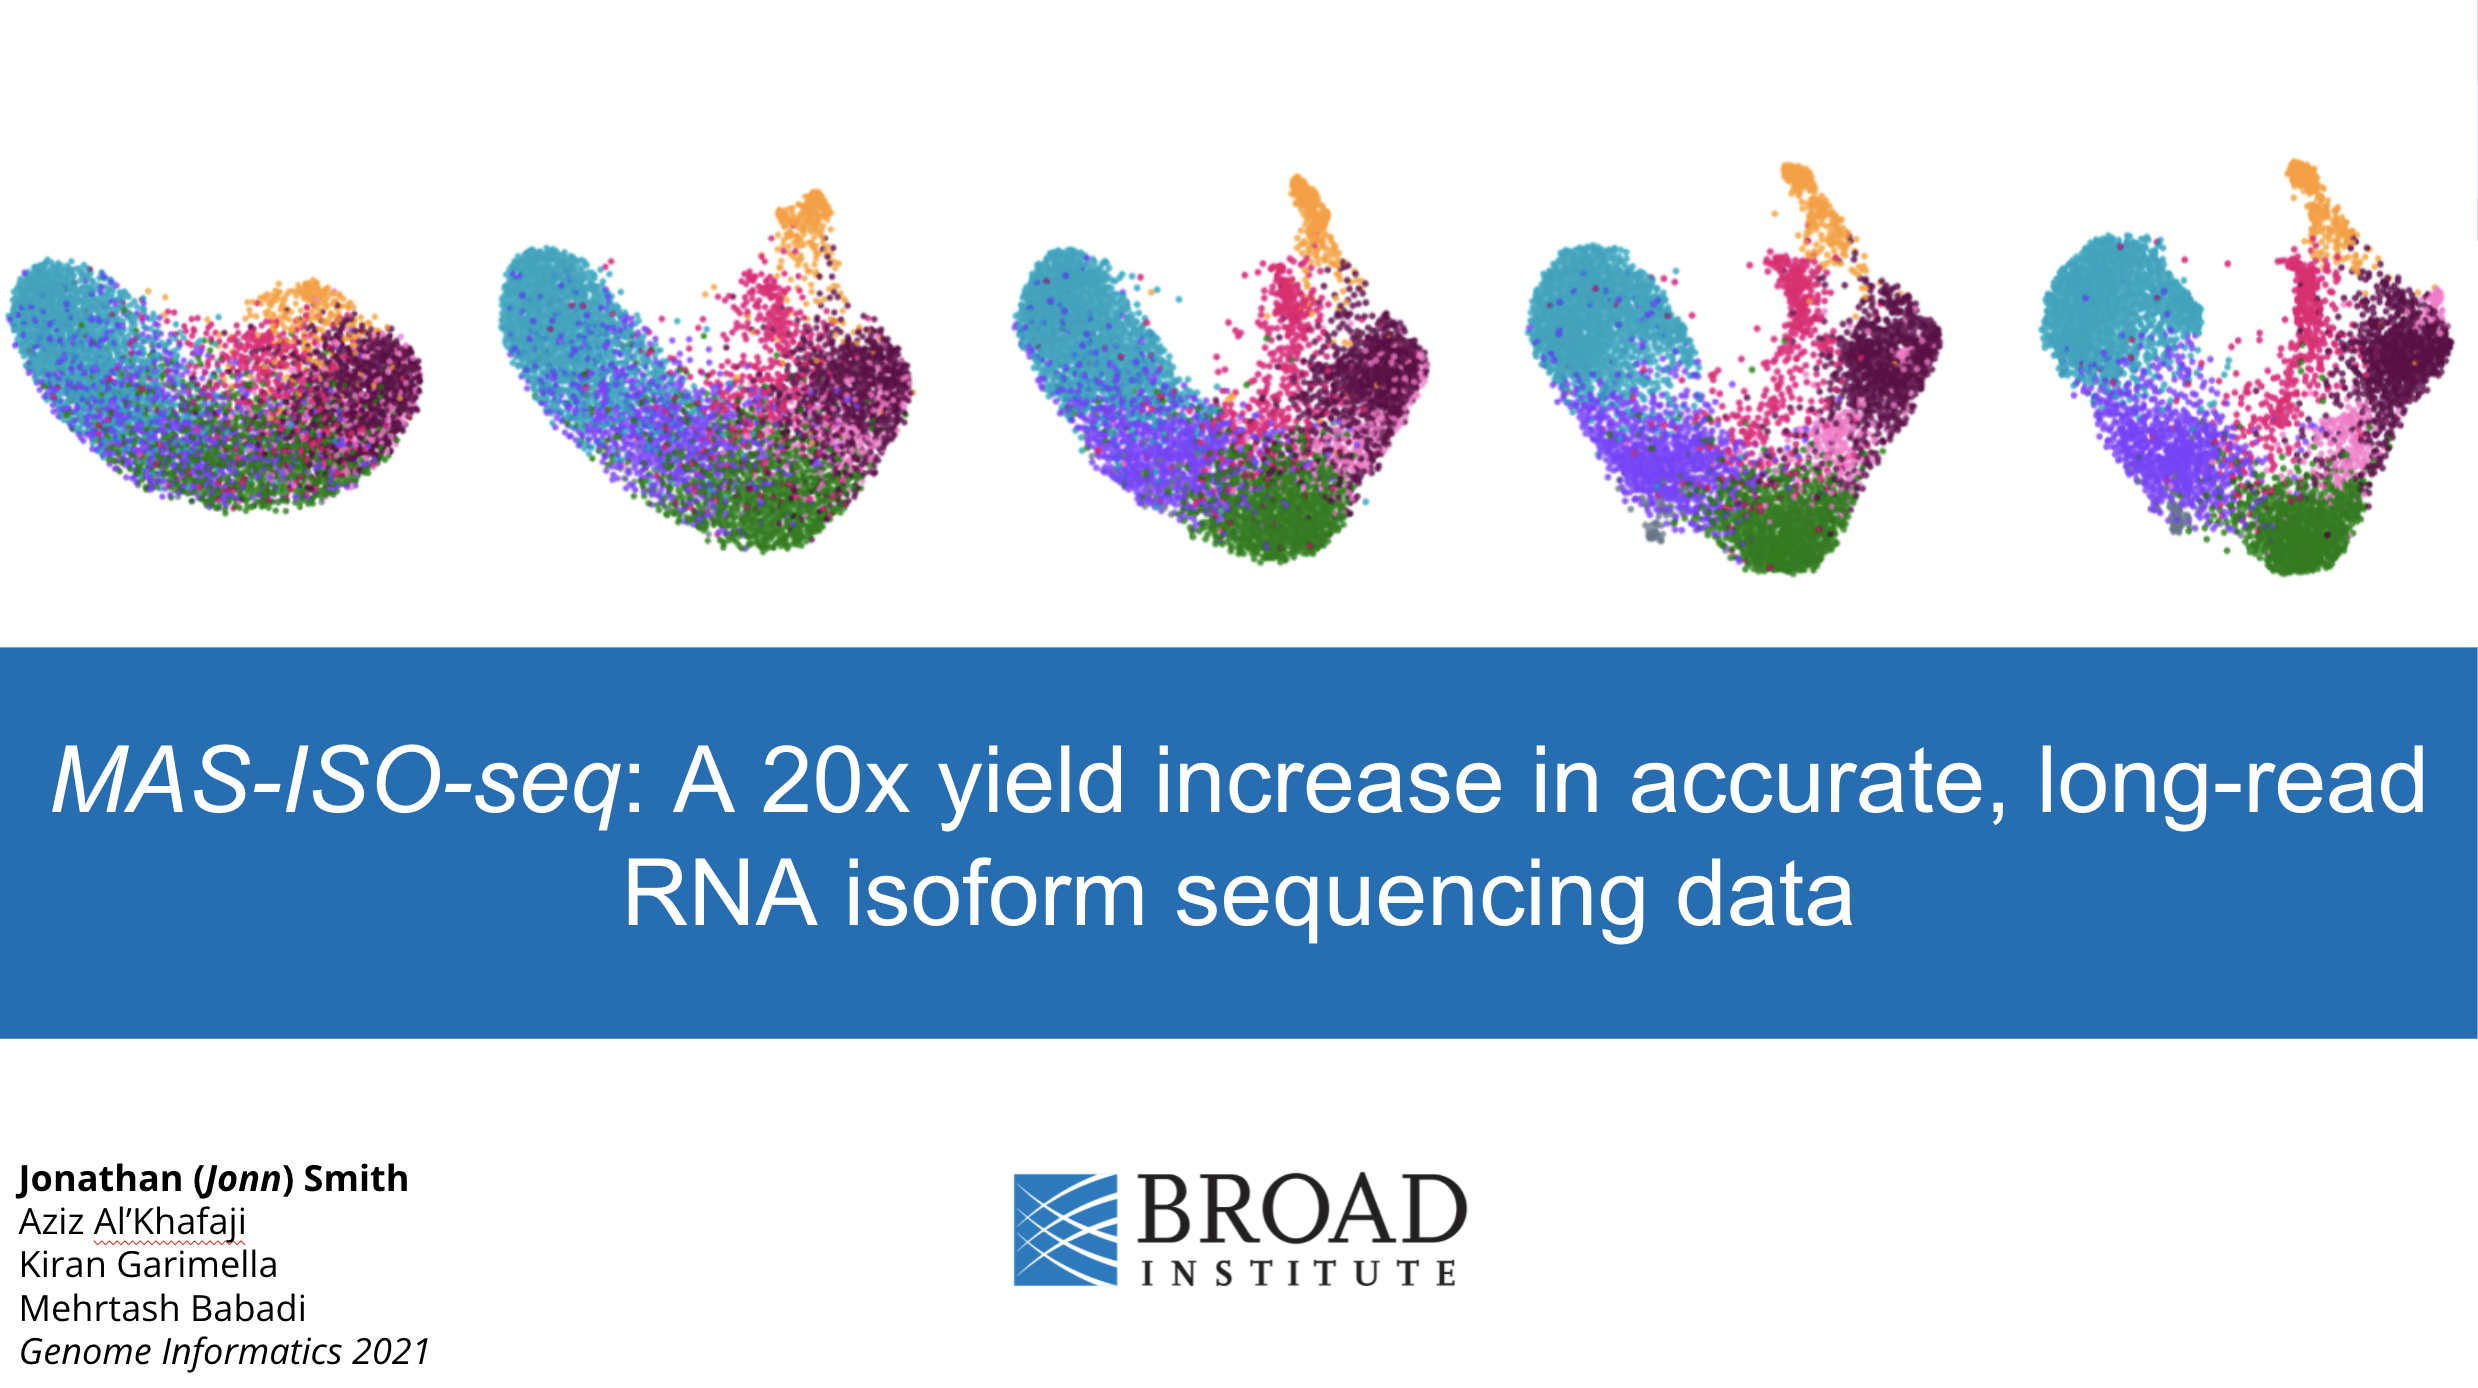 MAS-ISO-seq: A 20x yield increase in accurate, long-read RNA isoform sequencing data